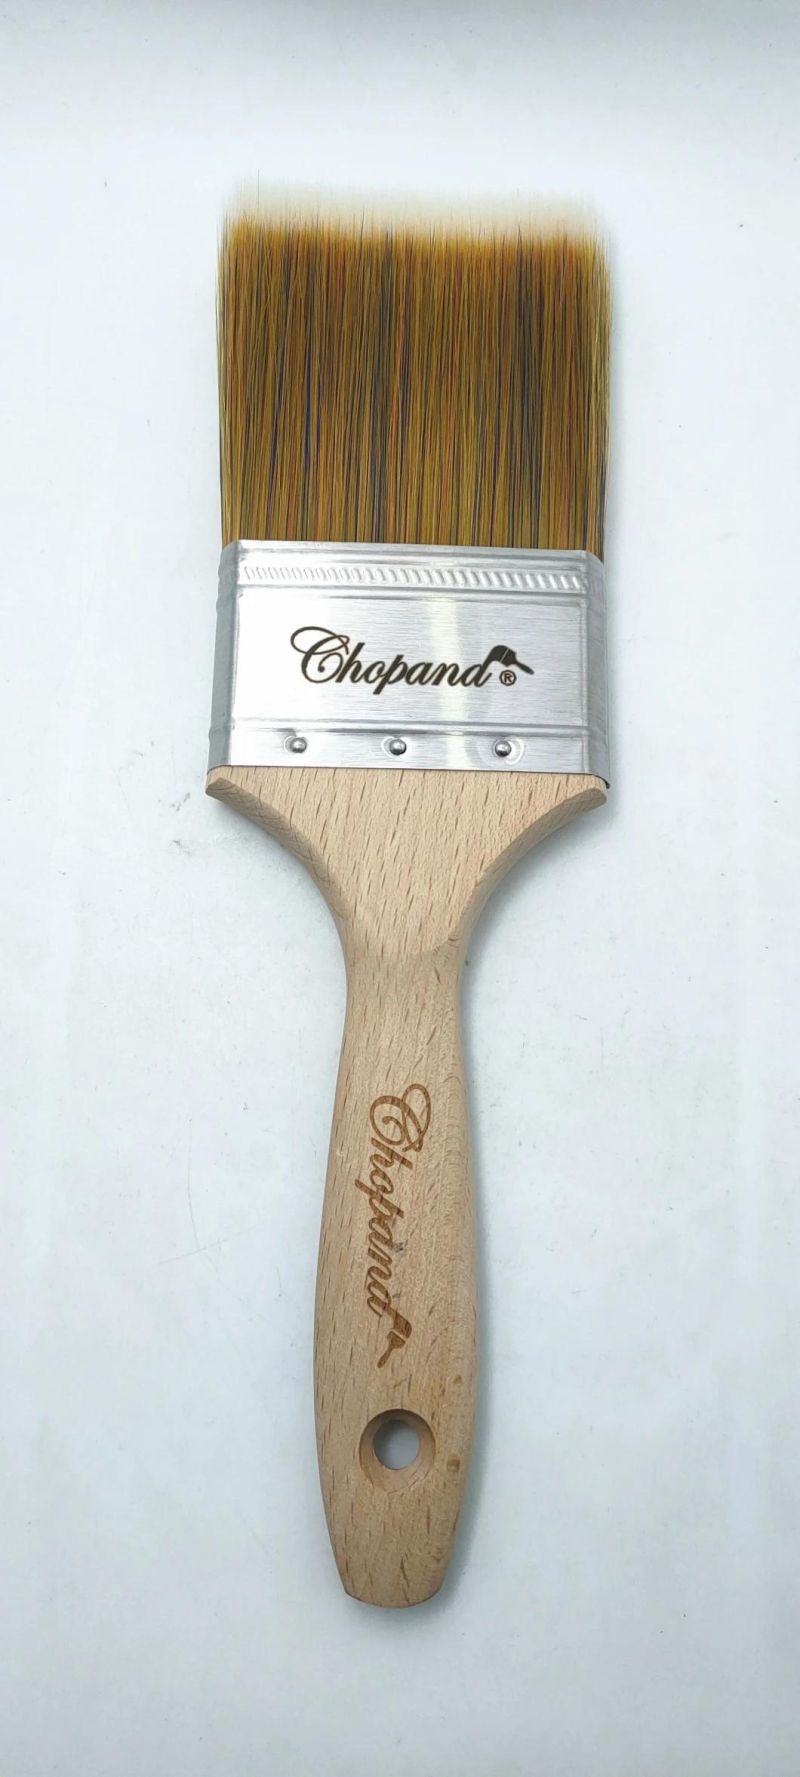 Chopand Colorful Classic Natural Besutiful Wooden Handle Paint Brush